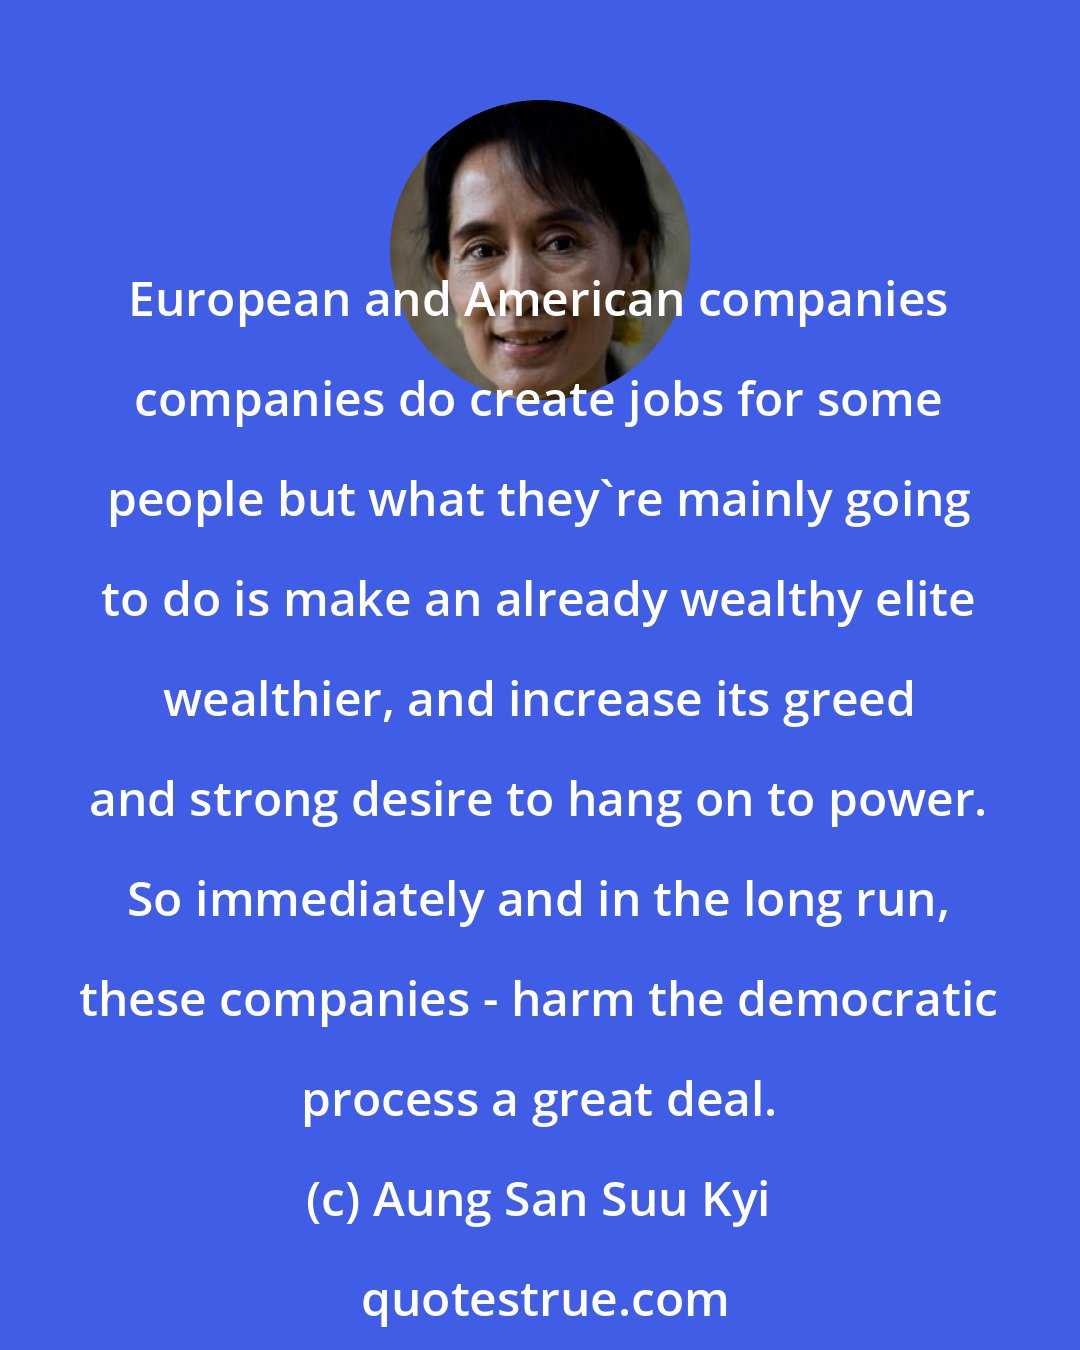 Aung San Suu Kyi: European and American companies companies do create jobs for some people but what they're mainly going to do is make an already wealthy elite wealthier, and increase its greed and strong desire to hang on to power. So immediately and in the long run, these companies - harm the democratic process a great deal.